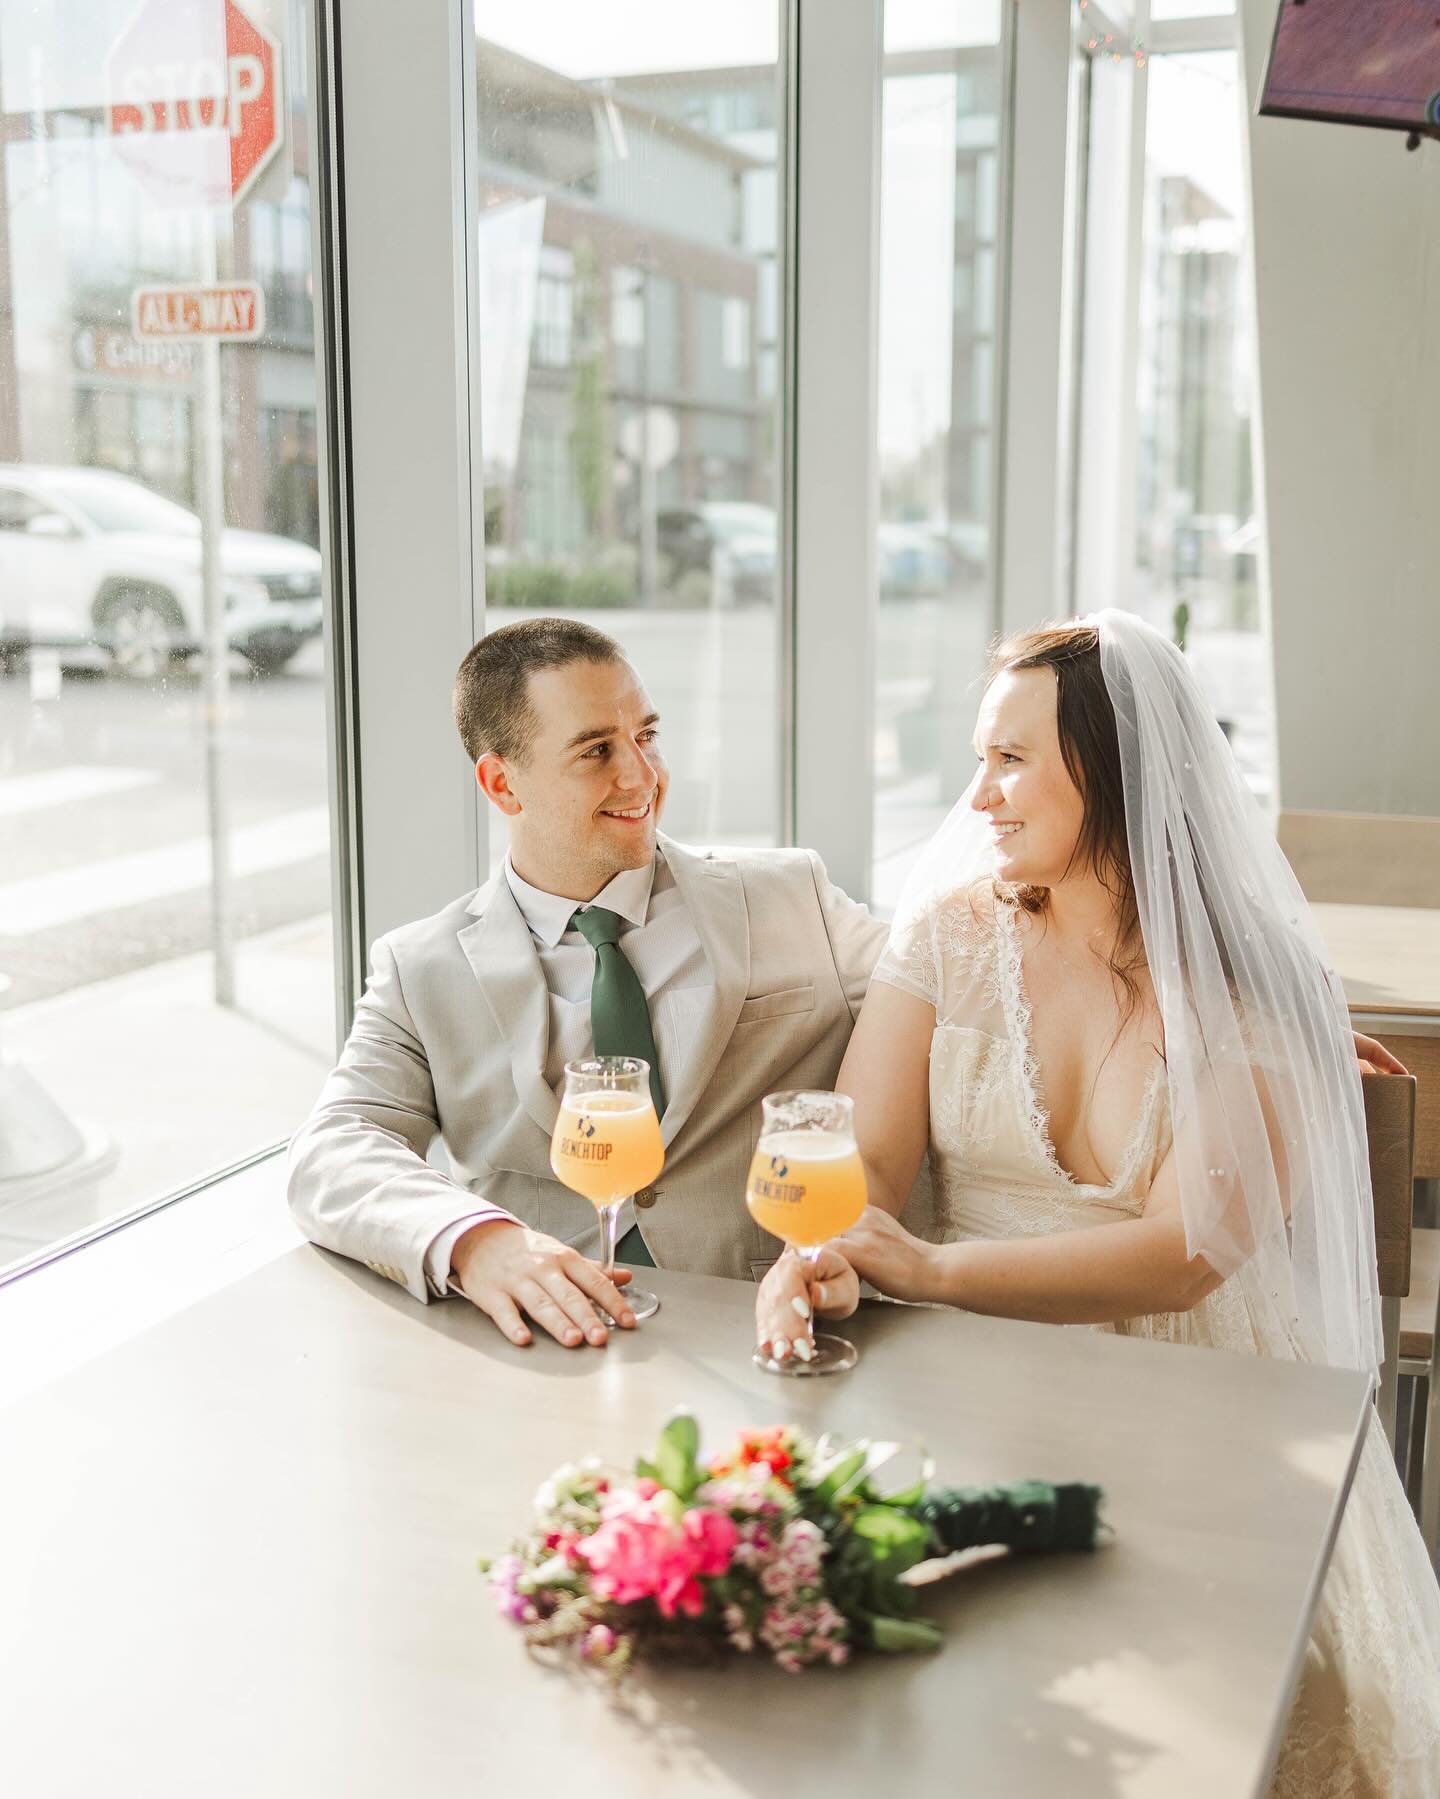 Babe!! Let&rsquo;s go to the brewery after saying &ldquo;I do&rdquo; 🍻

Absolutely enjoyed every minute of this day with Maggie &amp; Kevin. Slowly working through this gallery, and I cannot wait to share more! 🤍

So so so excited for all of the we